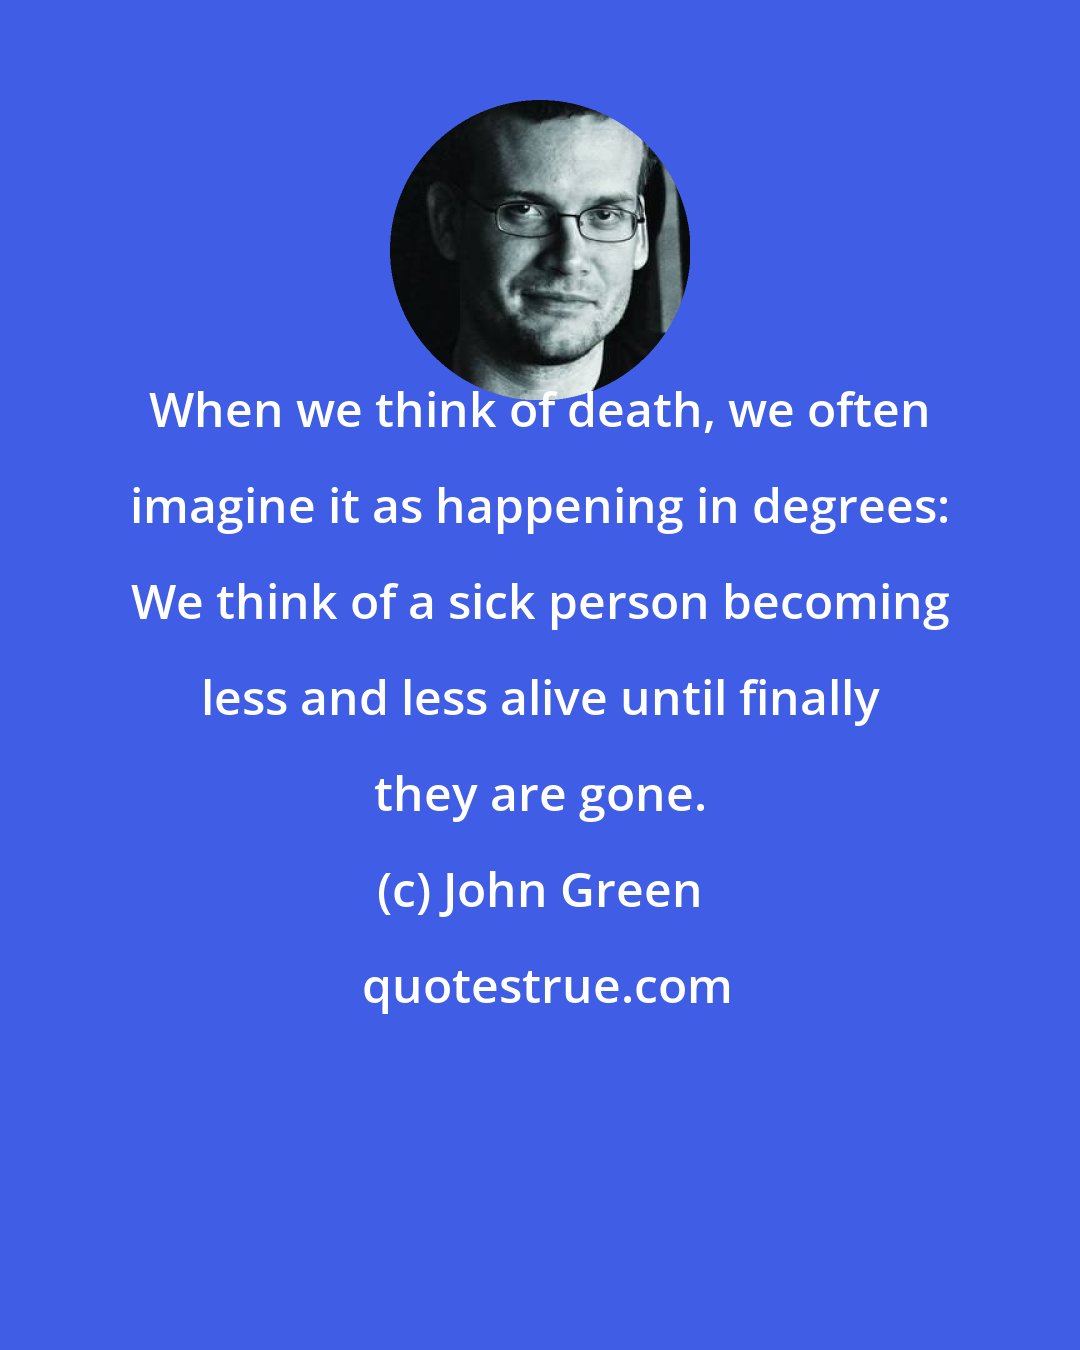 John Green: When we think of death, we often imagine it as happening in degrees: We think of a sick person becoming less and less alive until finally they are gone.